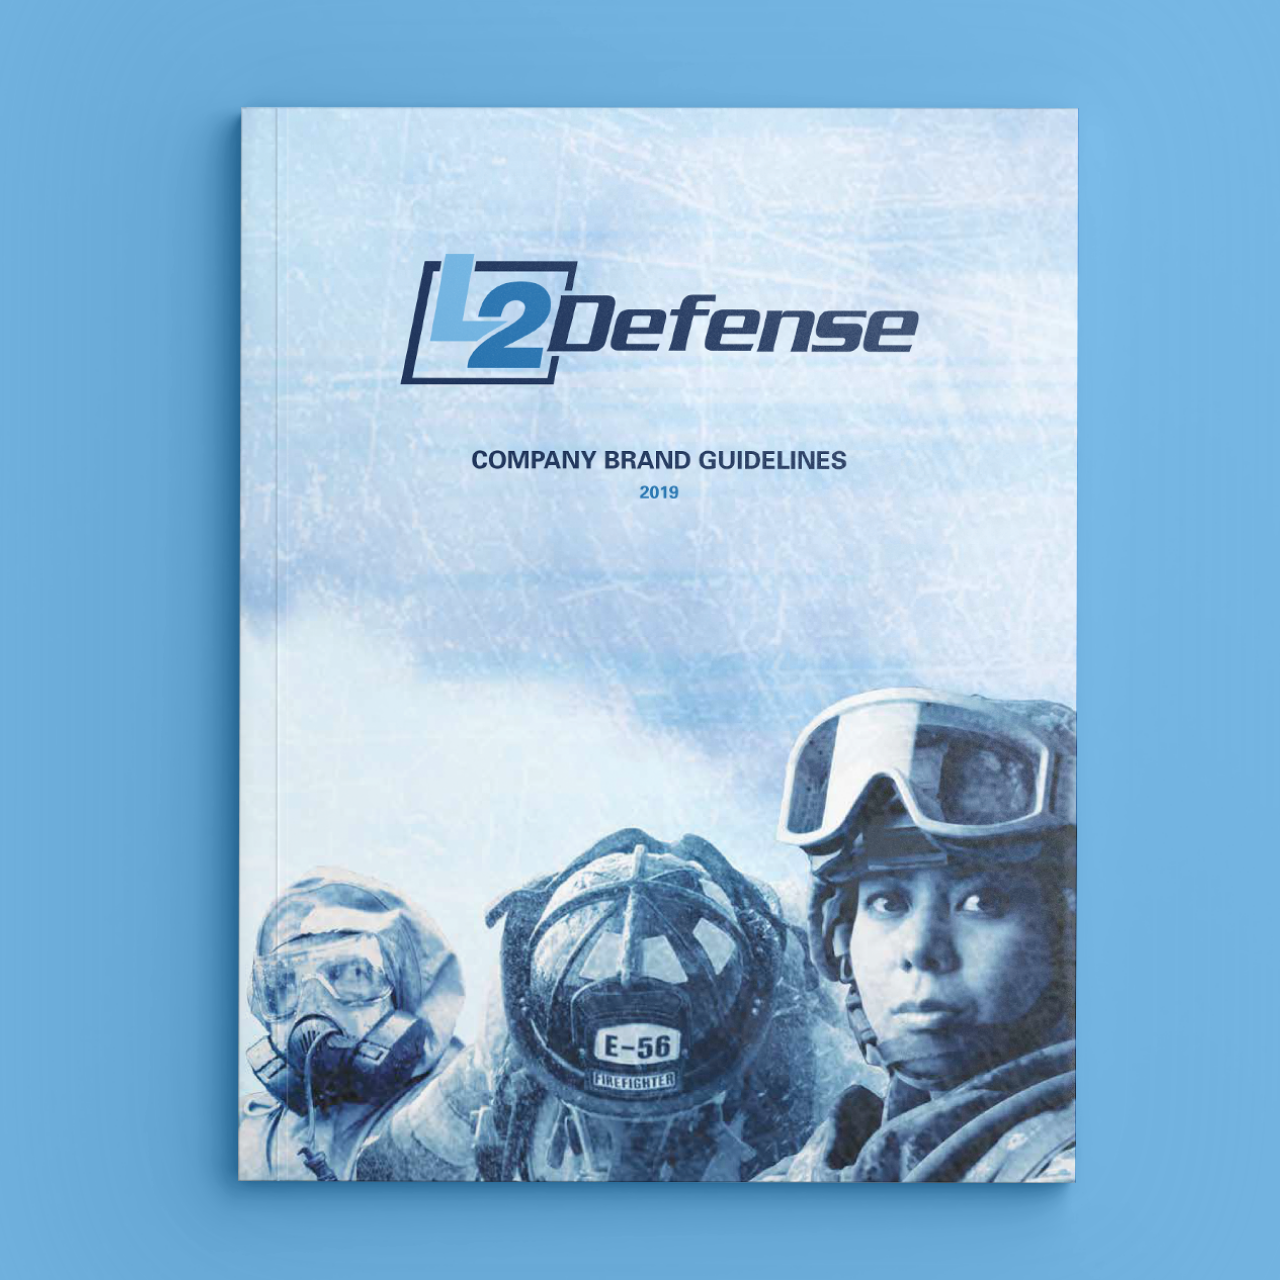 Gigawatt Group created visual branding elements and guidelines for L2 Defense.